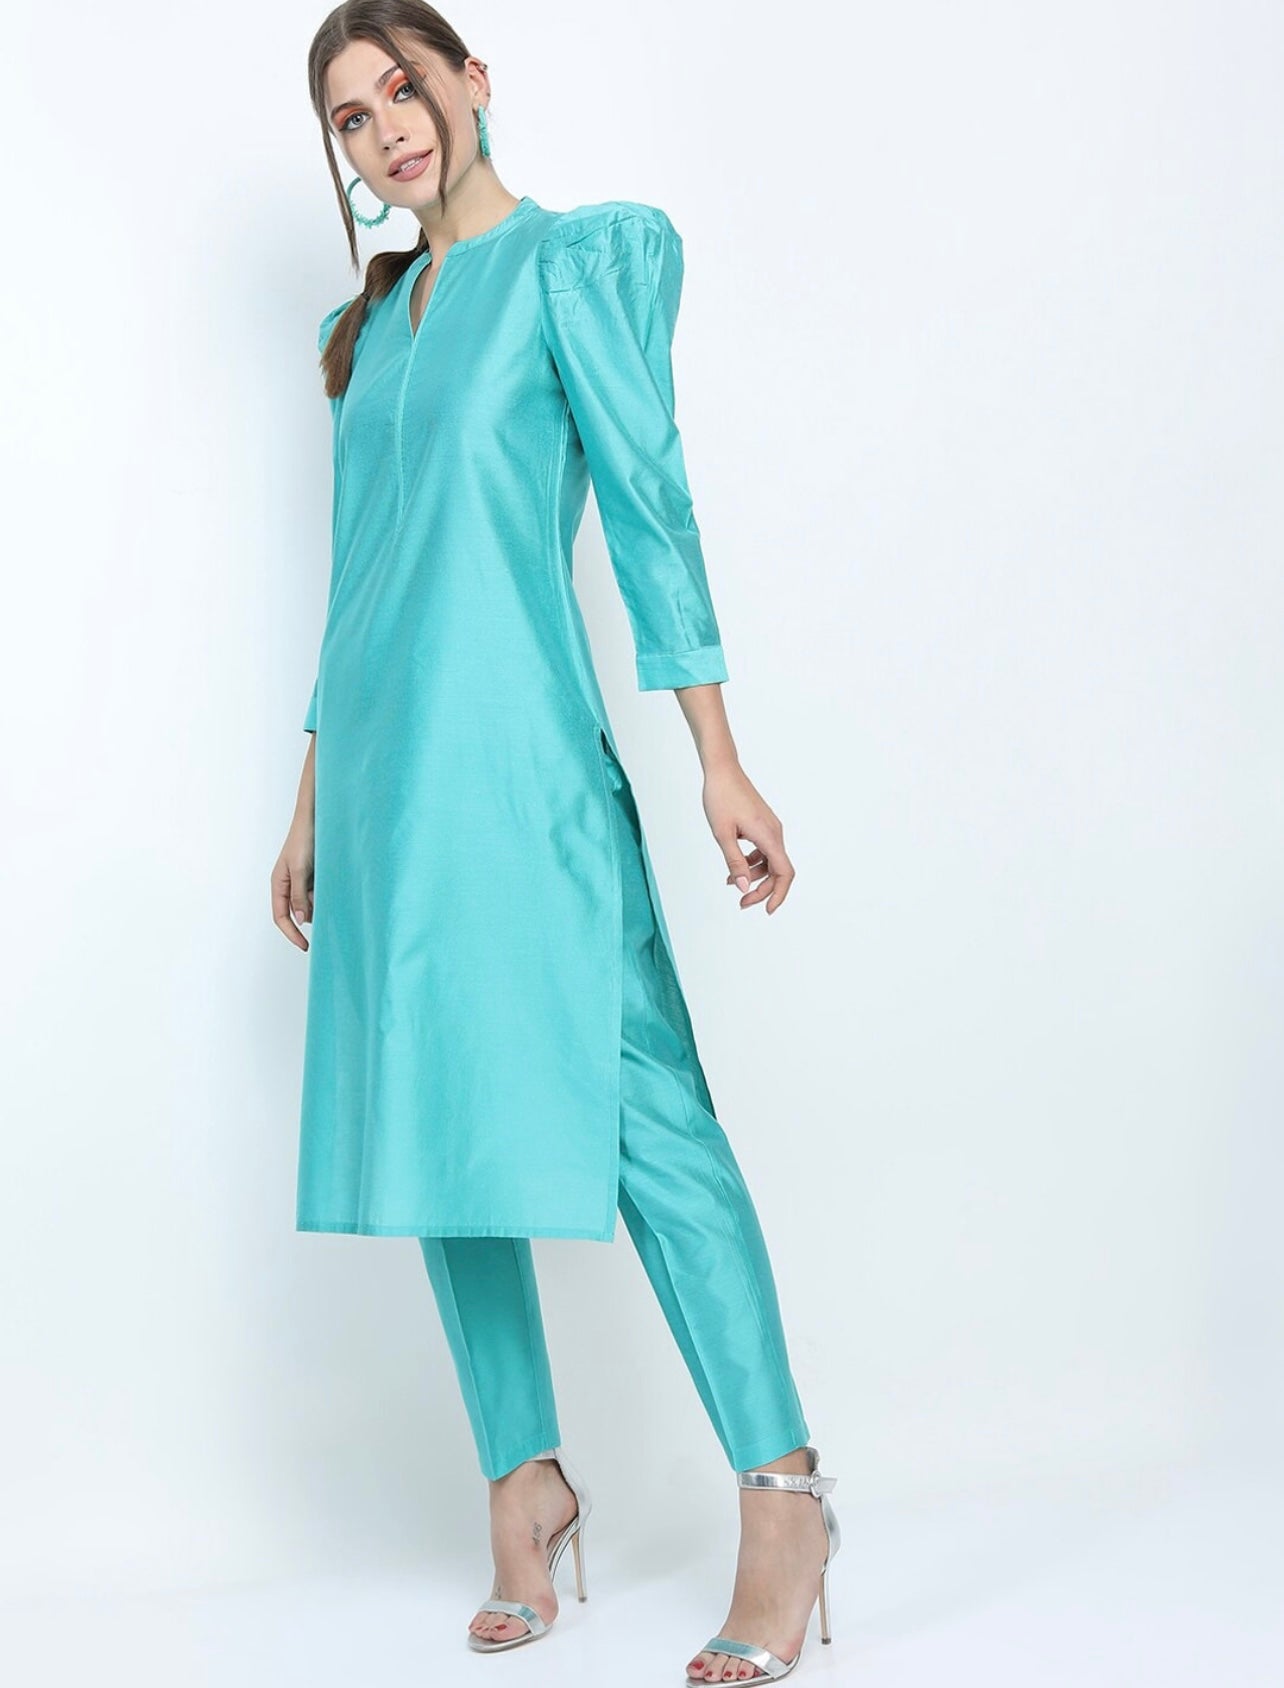 Buy ICARIA A Line Rayon Kurti Having Bell Shaped Sleeves at Amazon.in